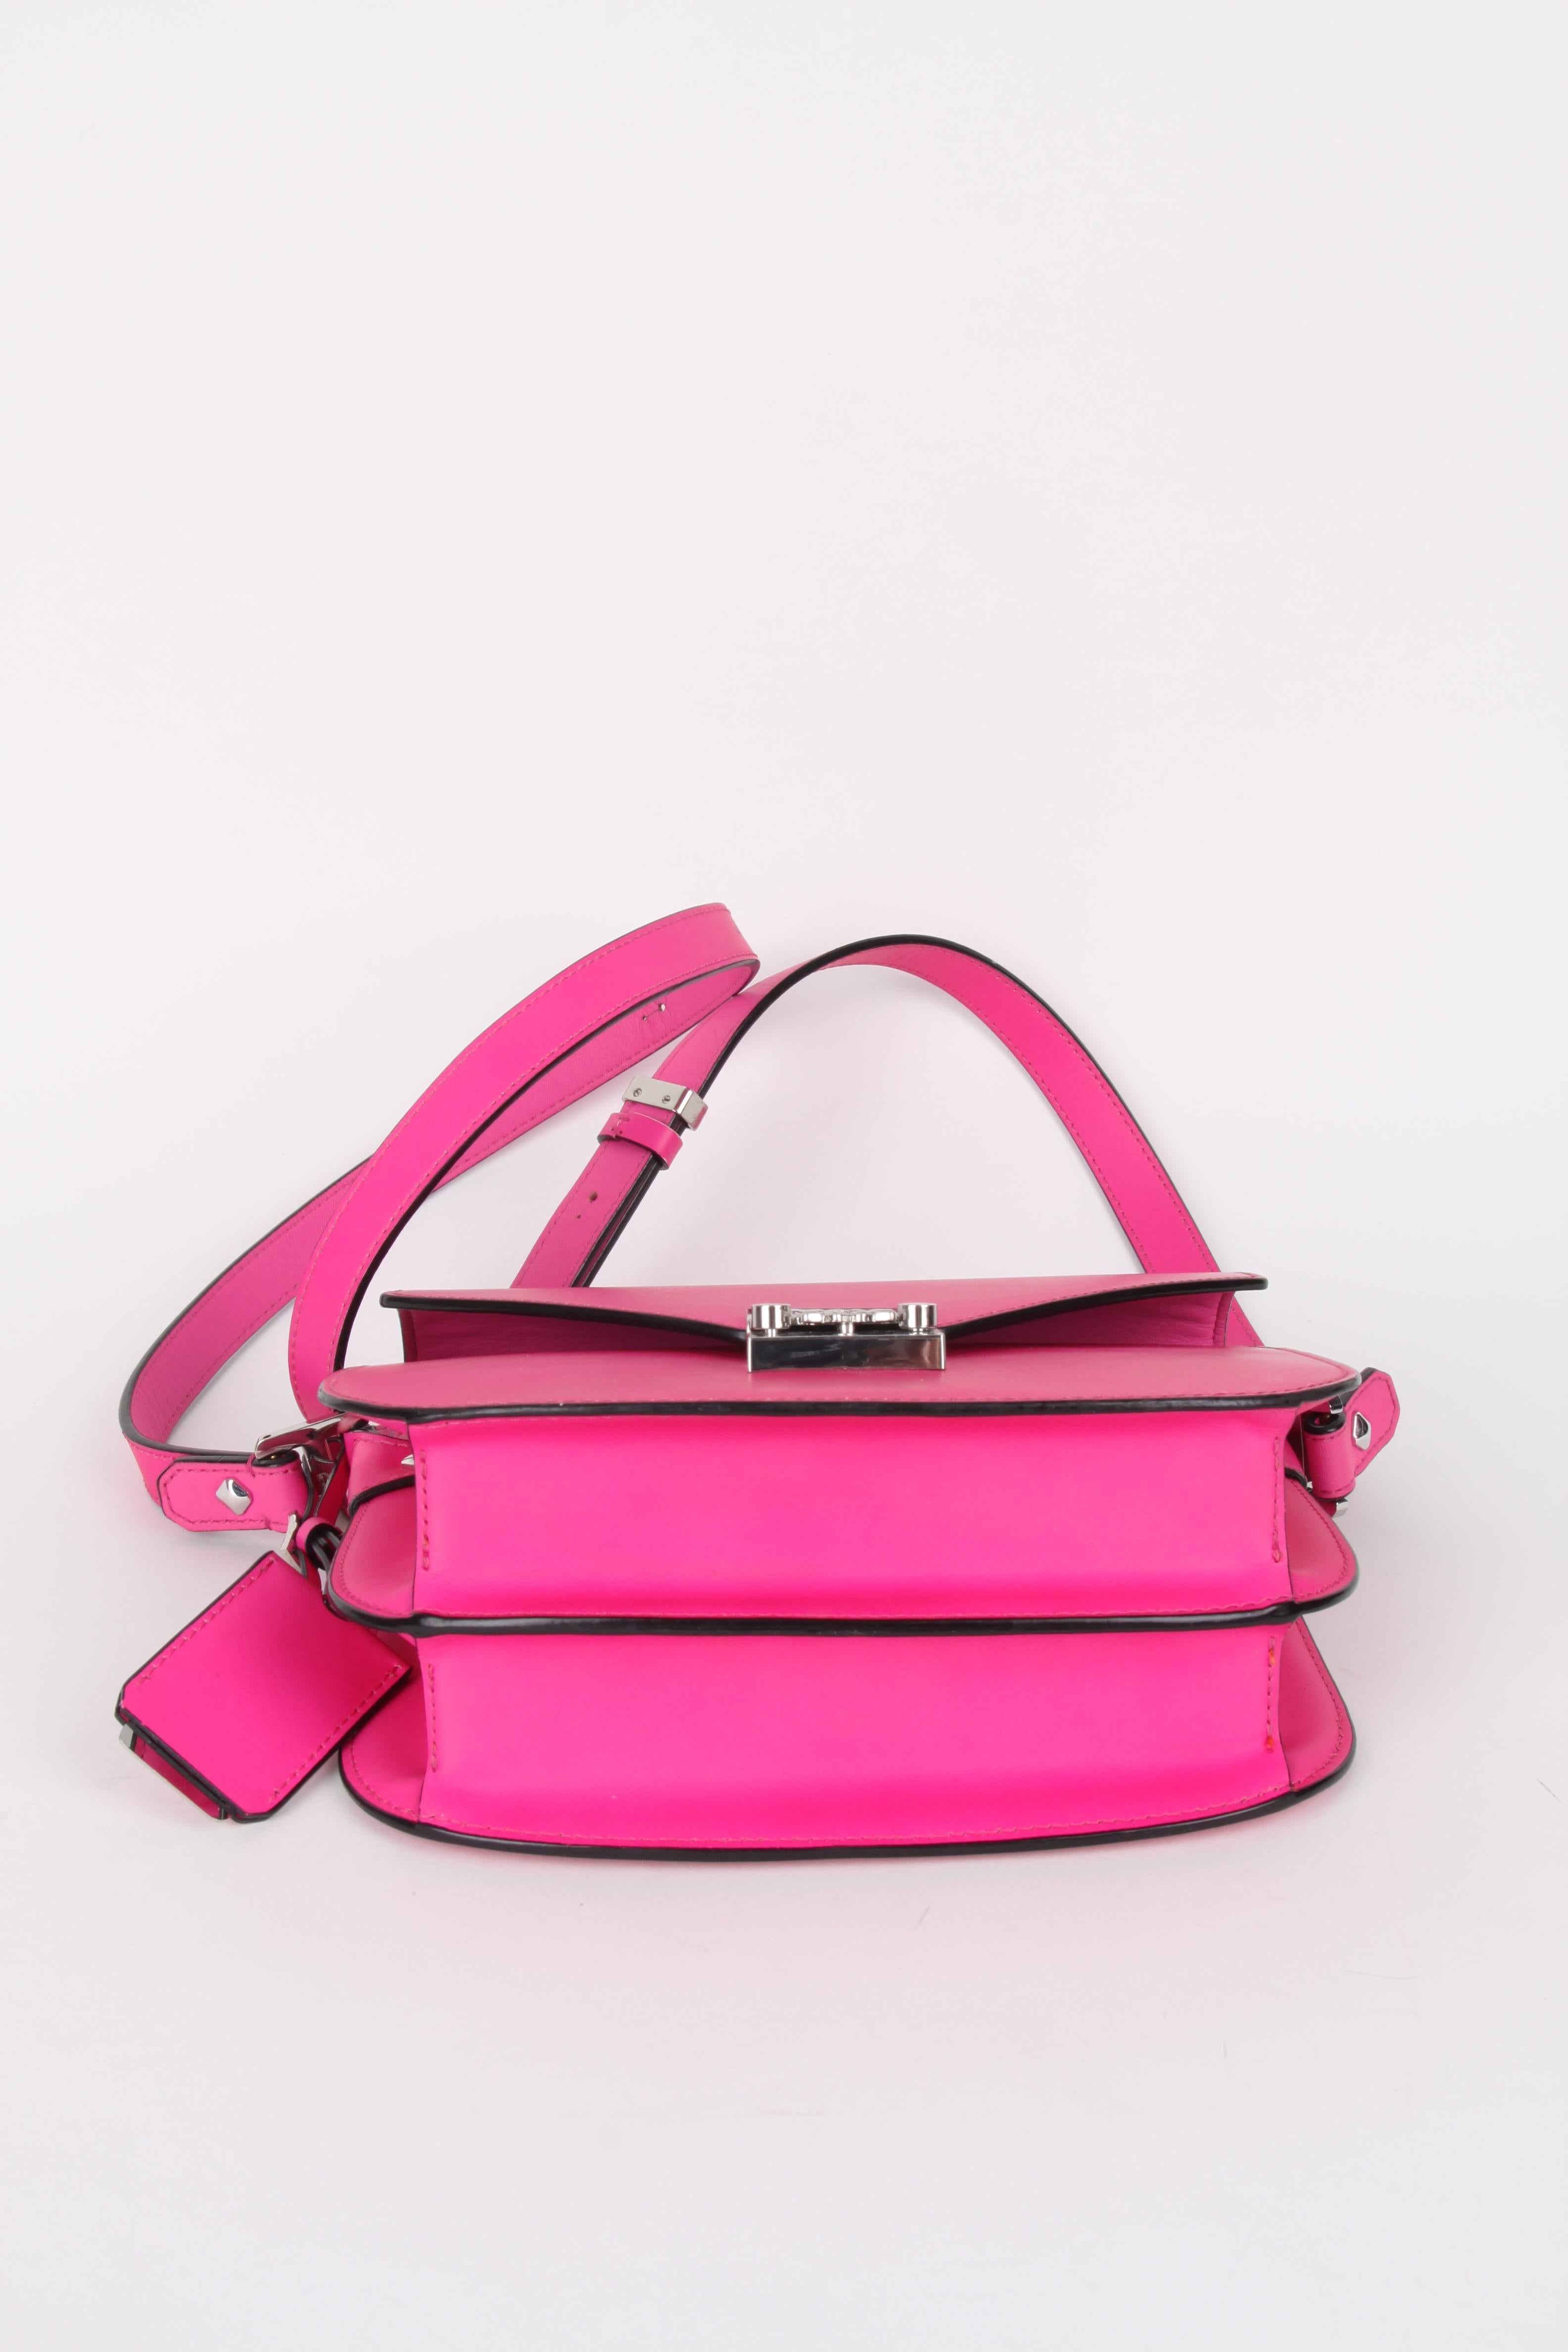 MCM Electric Pink Patricia Calfskin Crossbody Bag In Excellent Condition For Sale In Baarn, NL